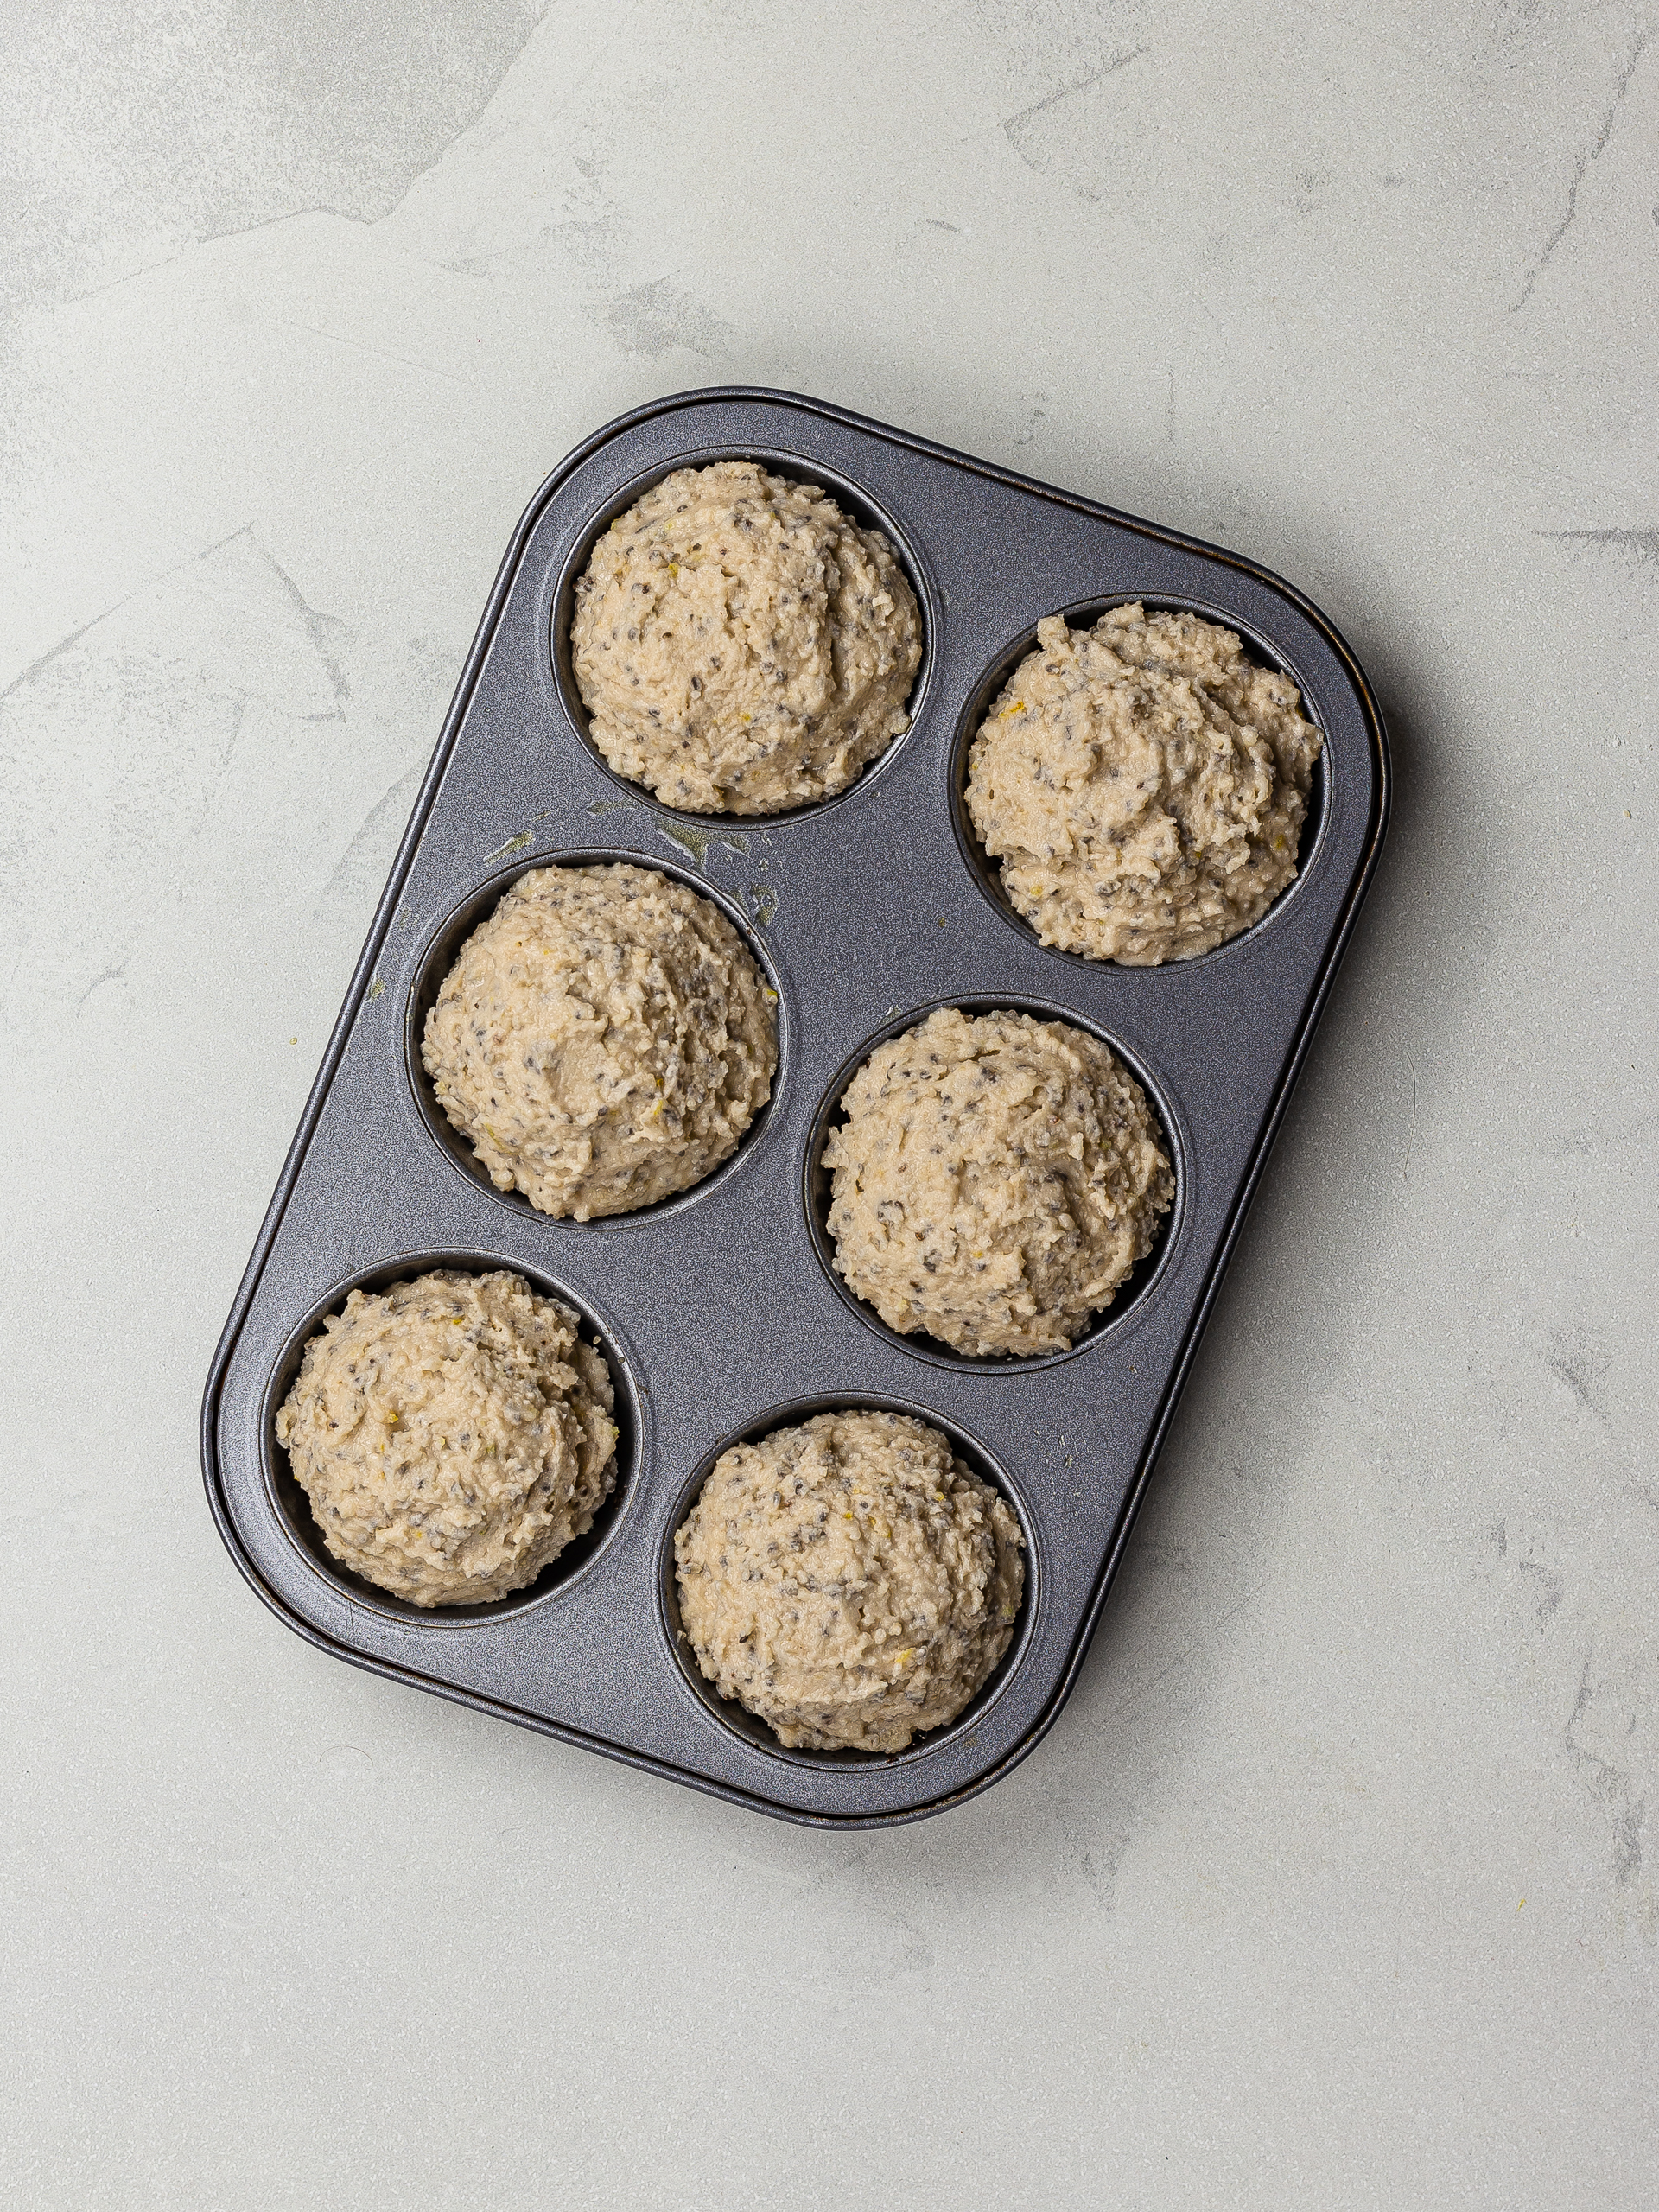 lemon chia seed muffin batter in a muffin tin